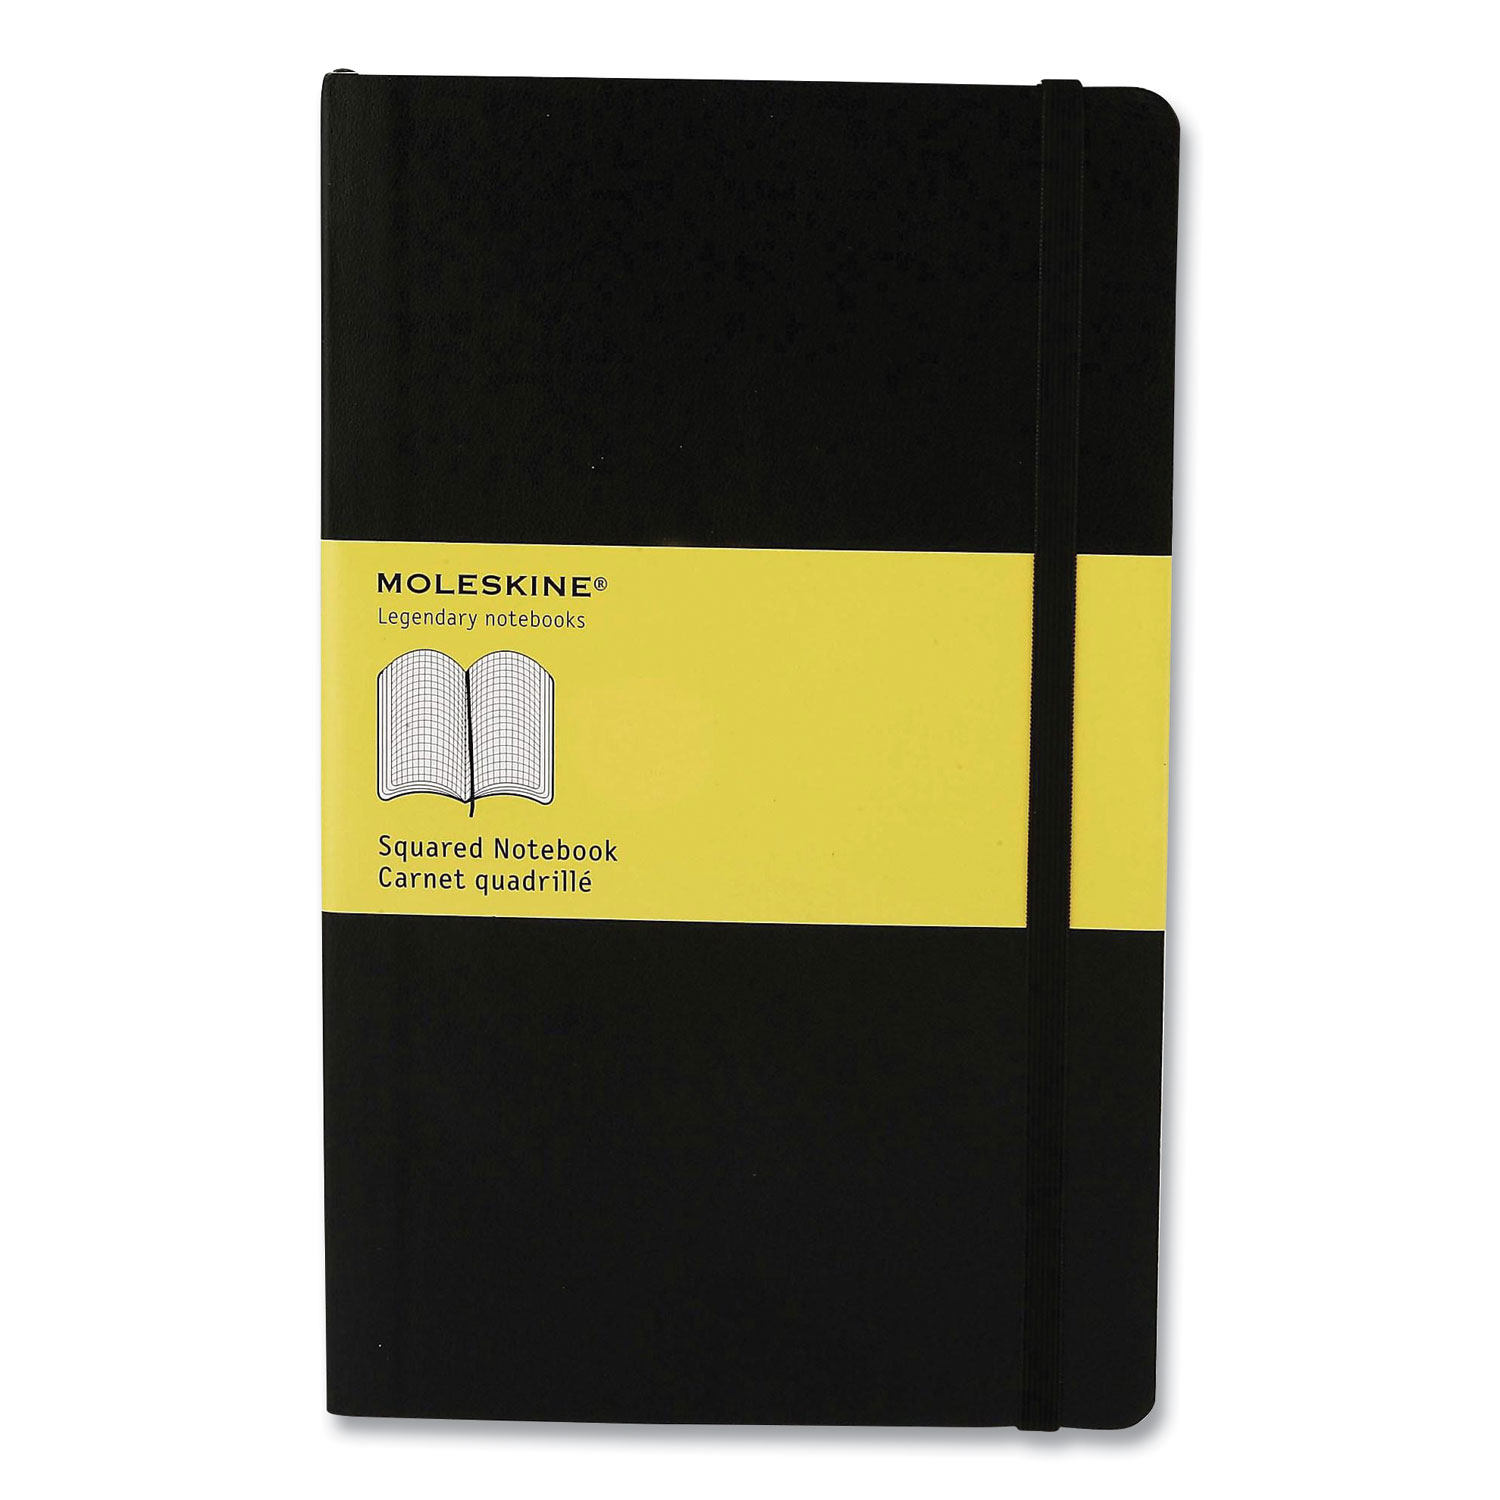  Moleskine 701139 Hard Cover Notebook, Quadrille Ruled, Black Cover, 8.25 x 5, 120 Pages (HBG401607) 